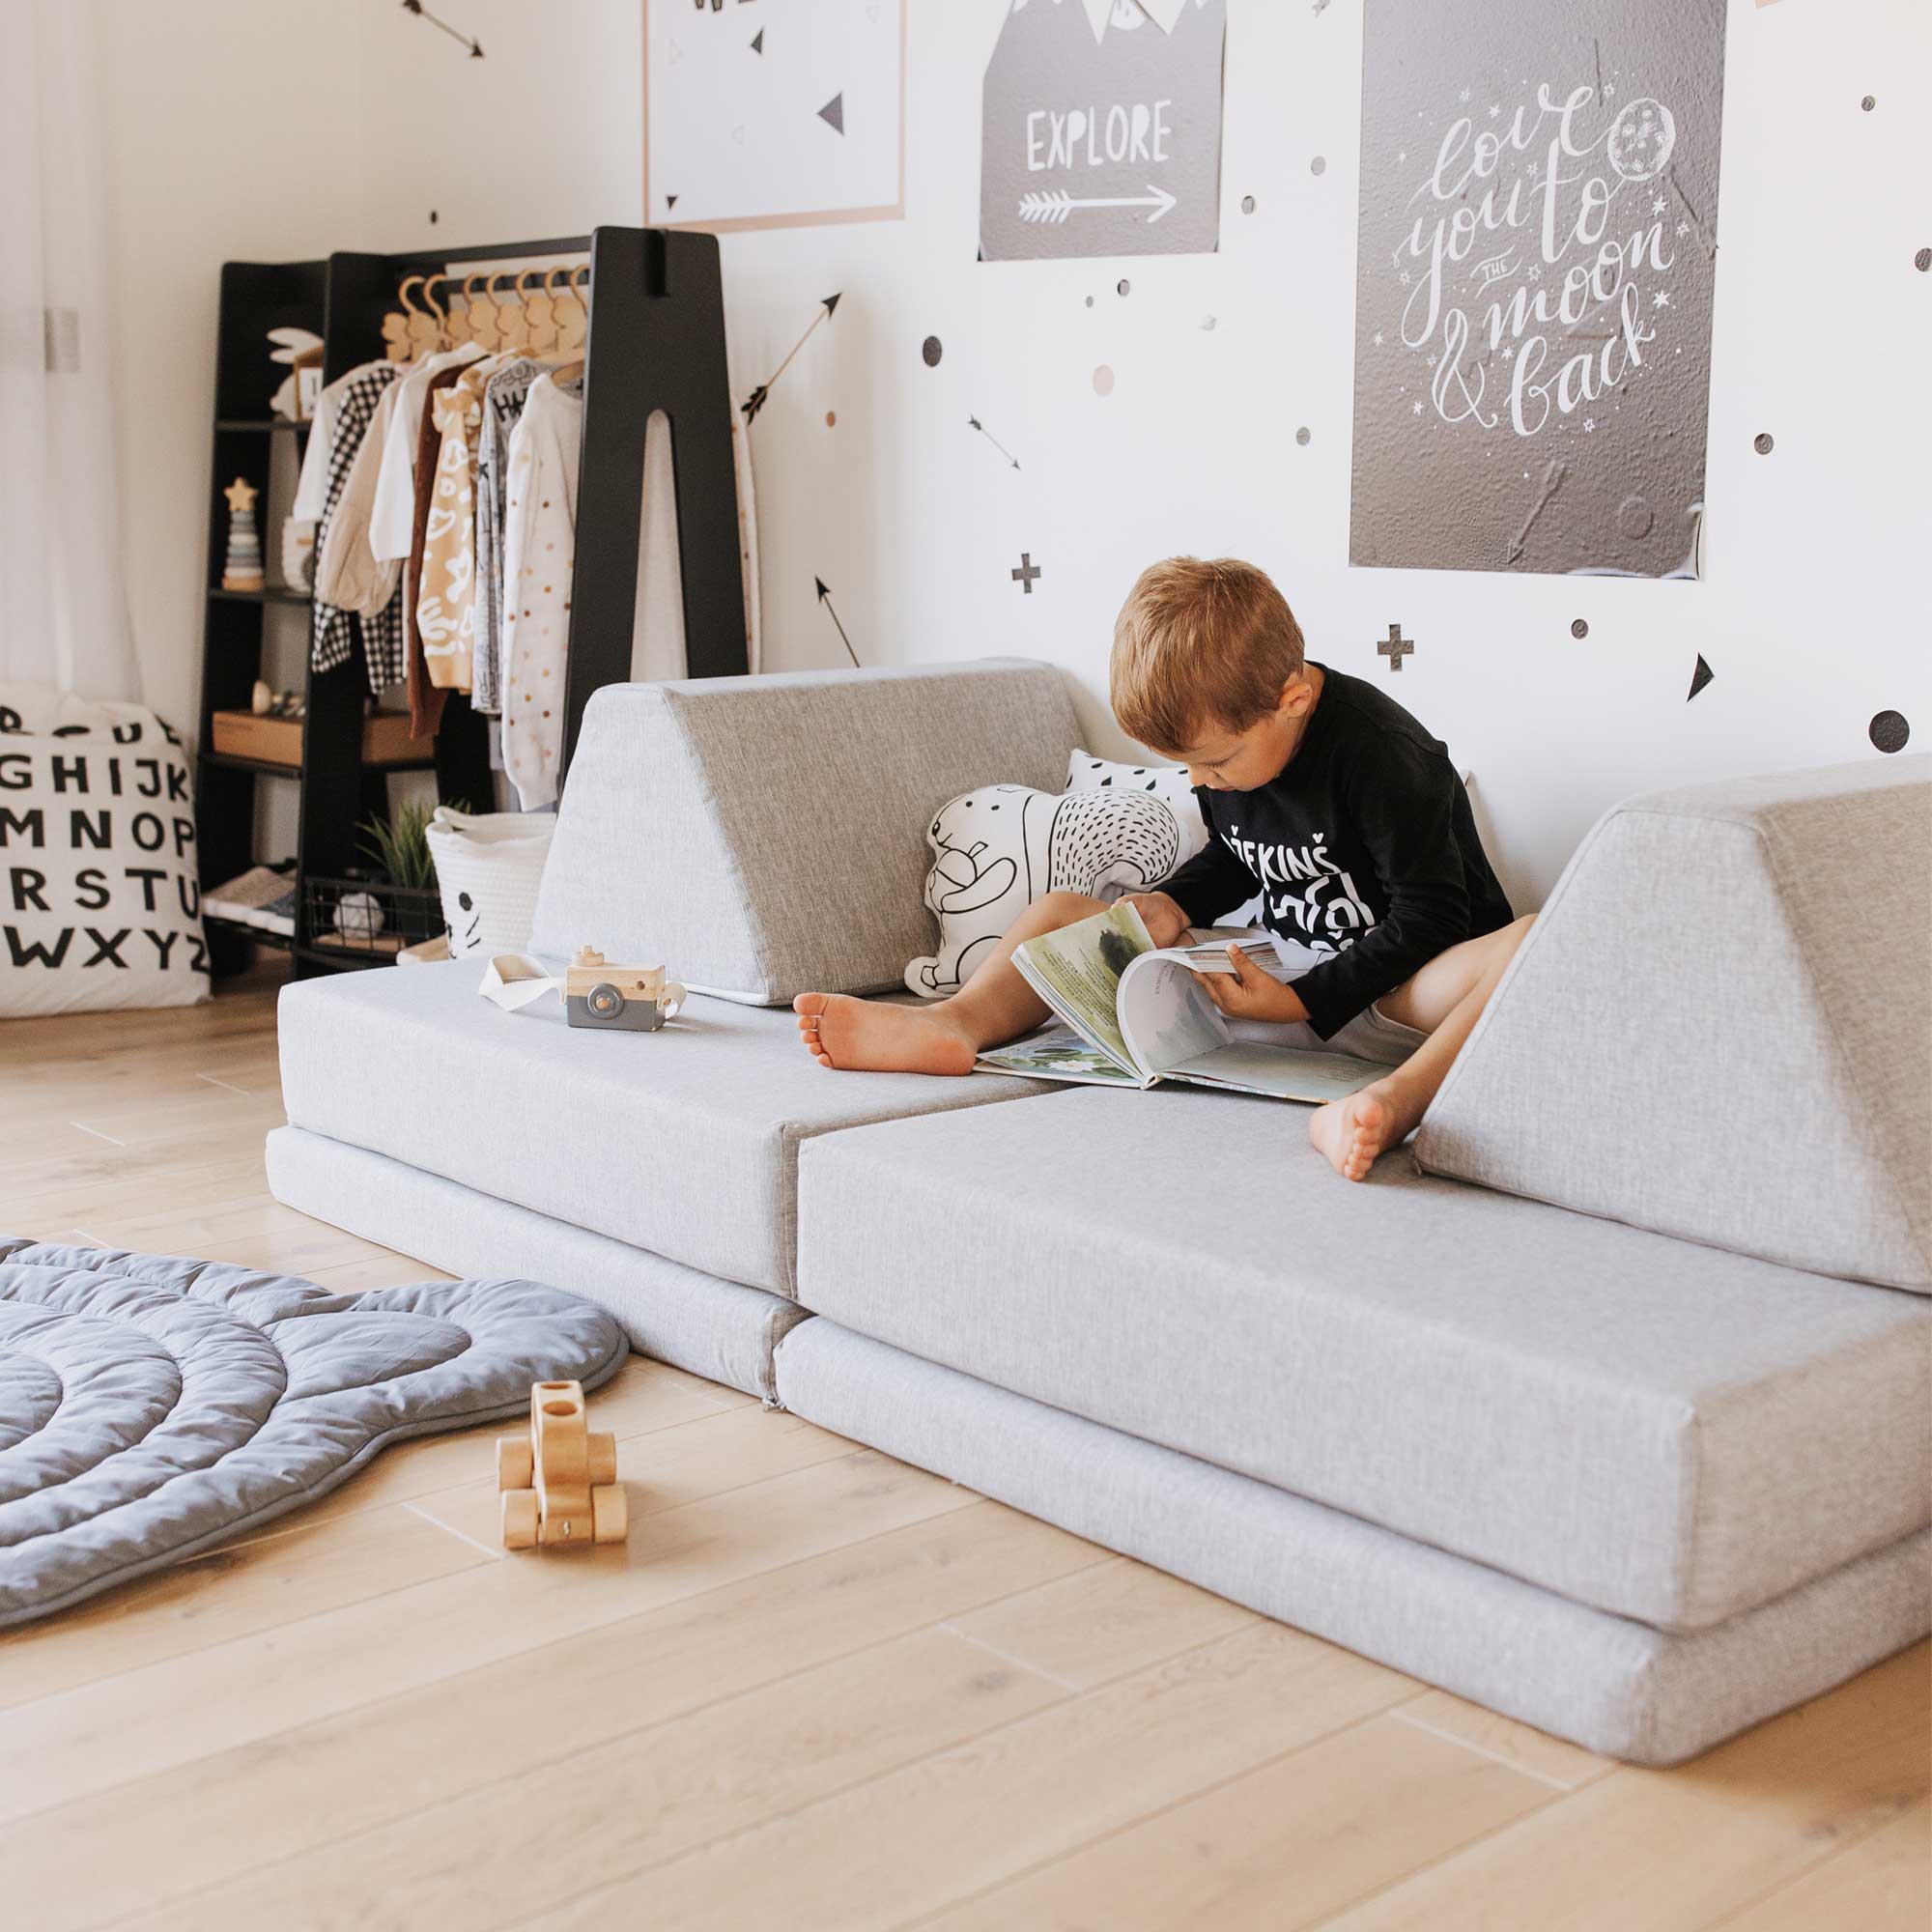 A child is reading a book on a grey couch in a child's room.